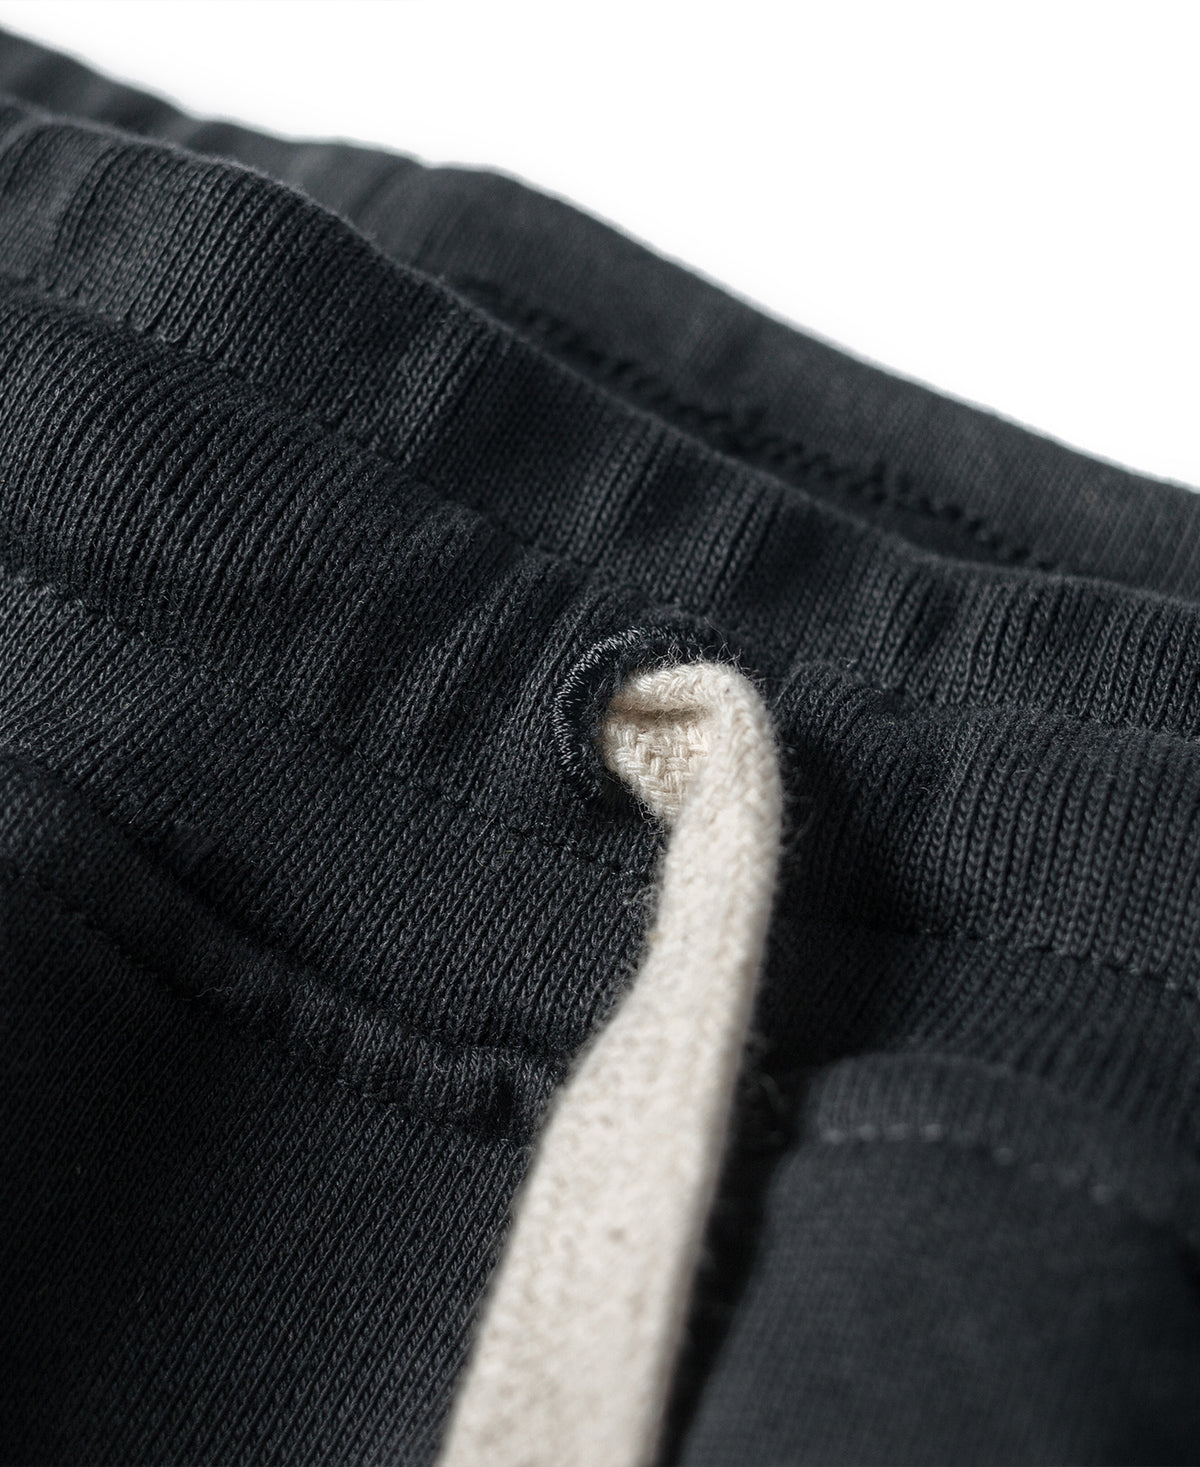 15 oz French Terry Sweat Shorts - Black